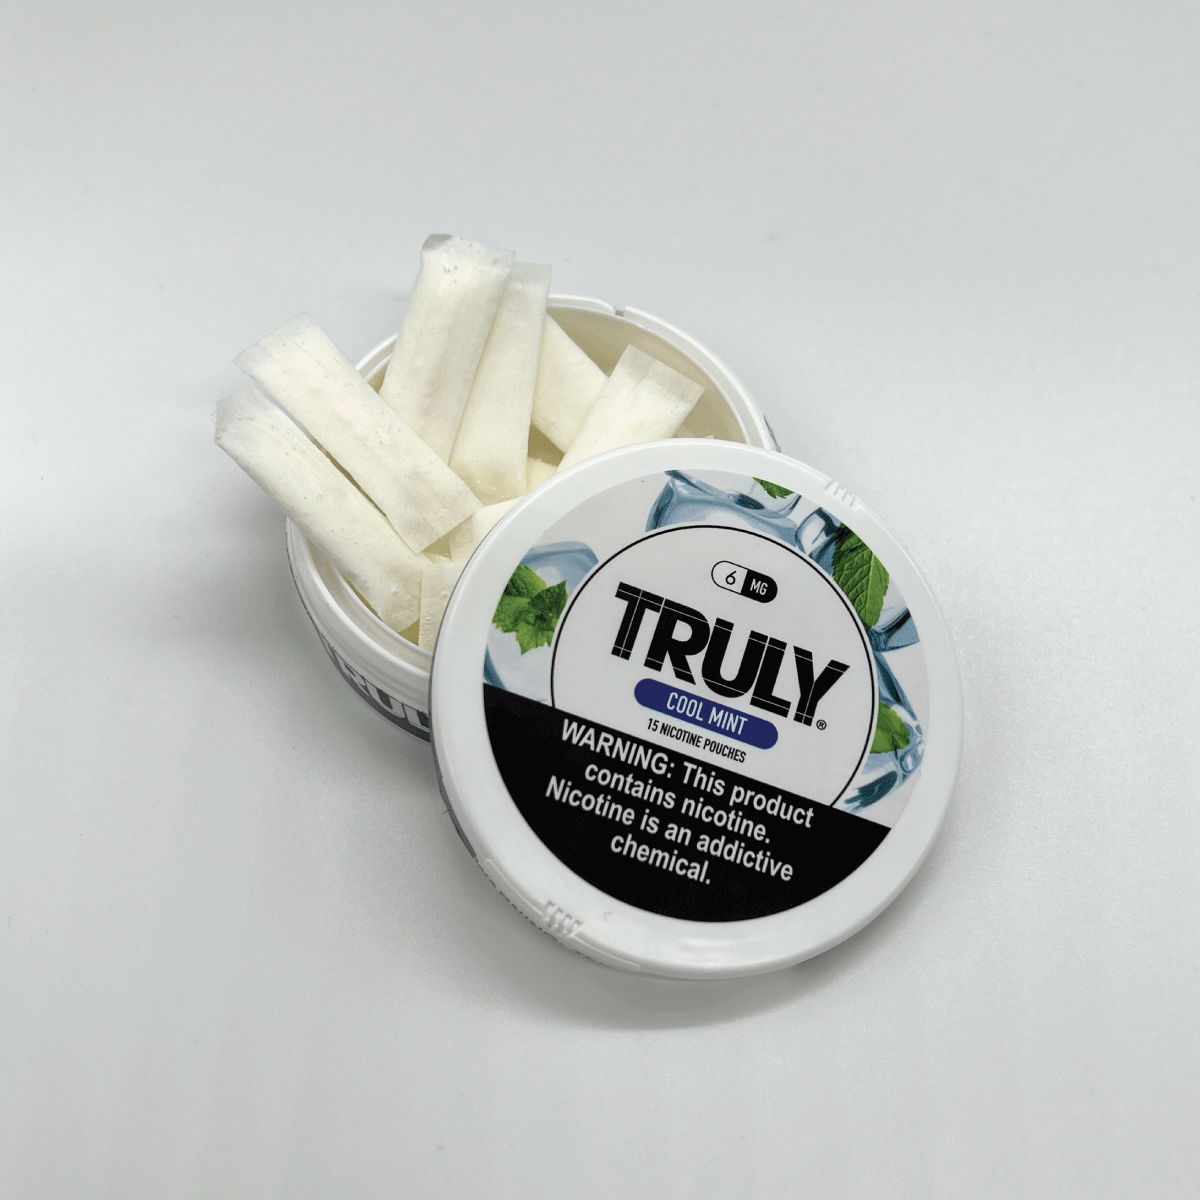 TRULY SPEARMINT NICOTINE POUCHES (15 COUNT)